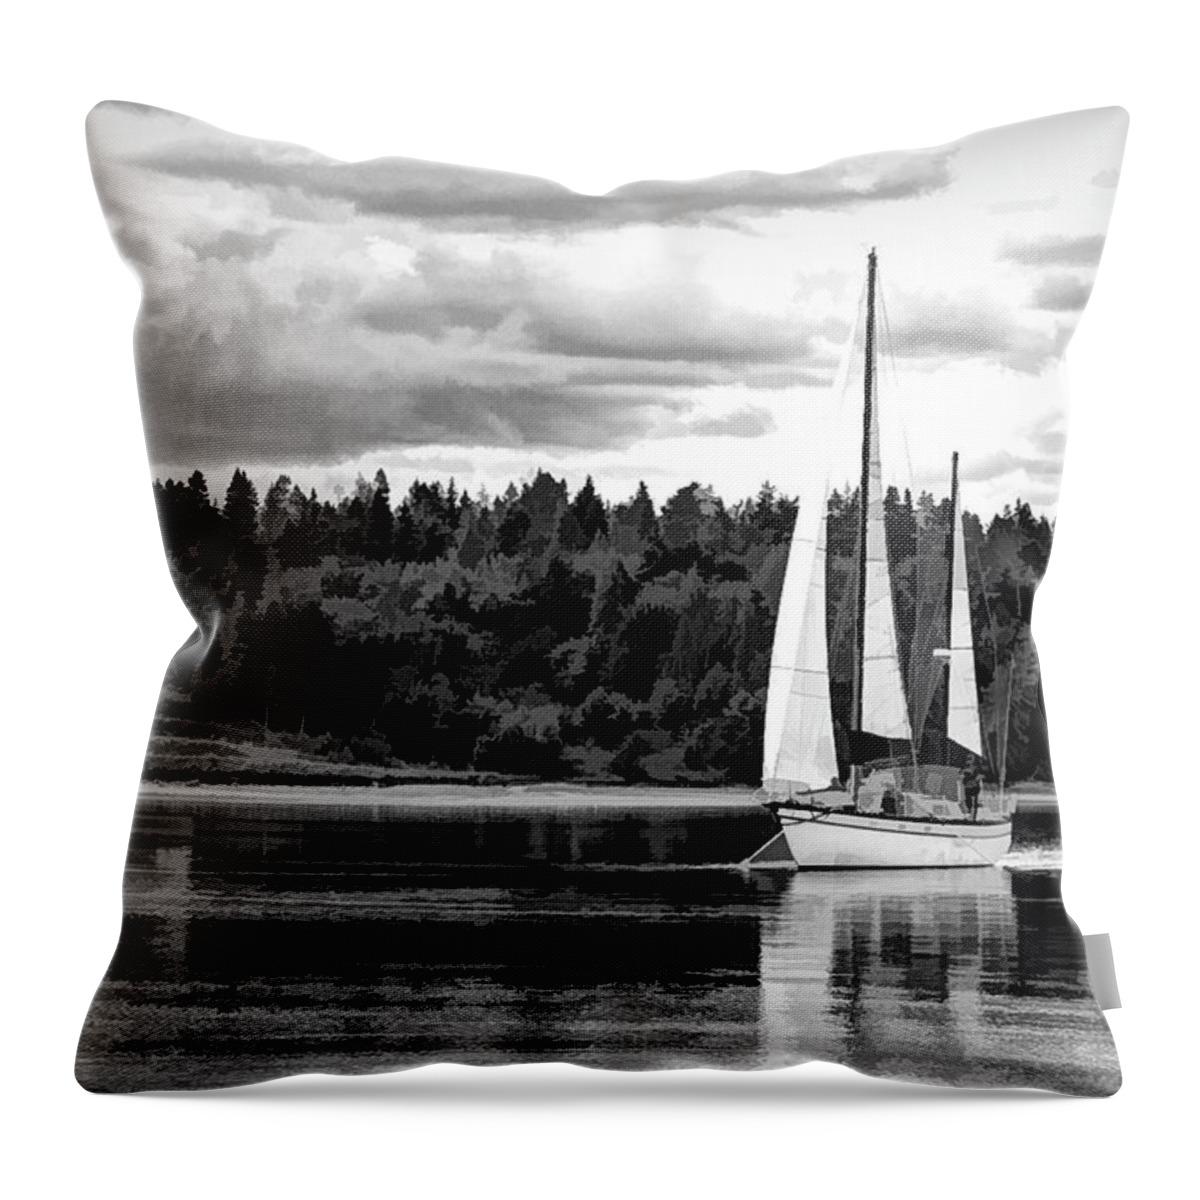 Monochrome Throw Pillow featuring the photograph Tranquility #4 by Bruce Bonnett